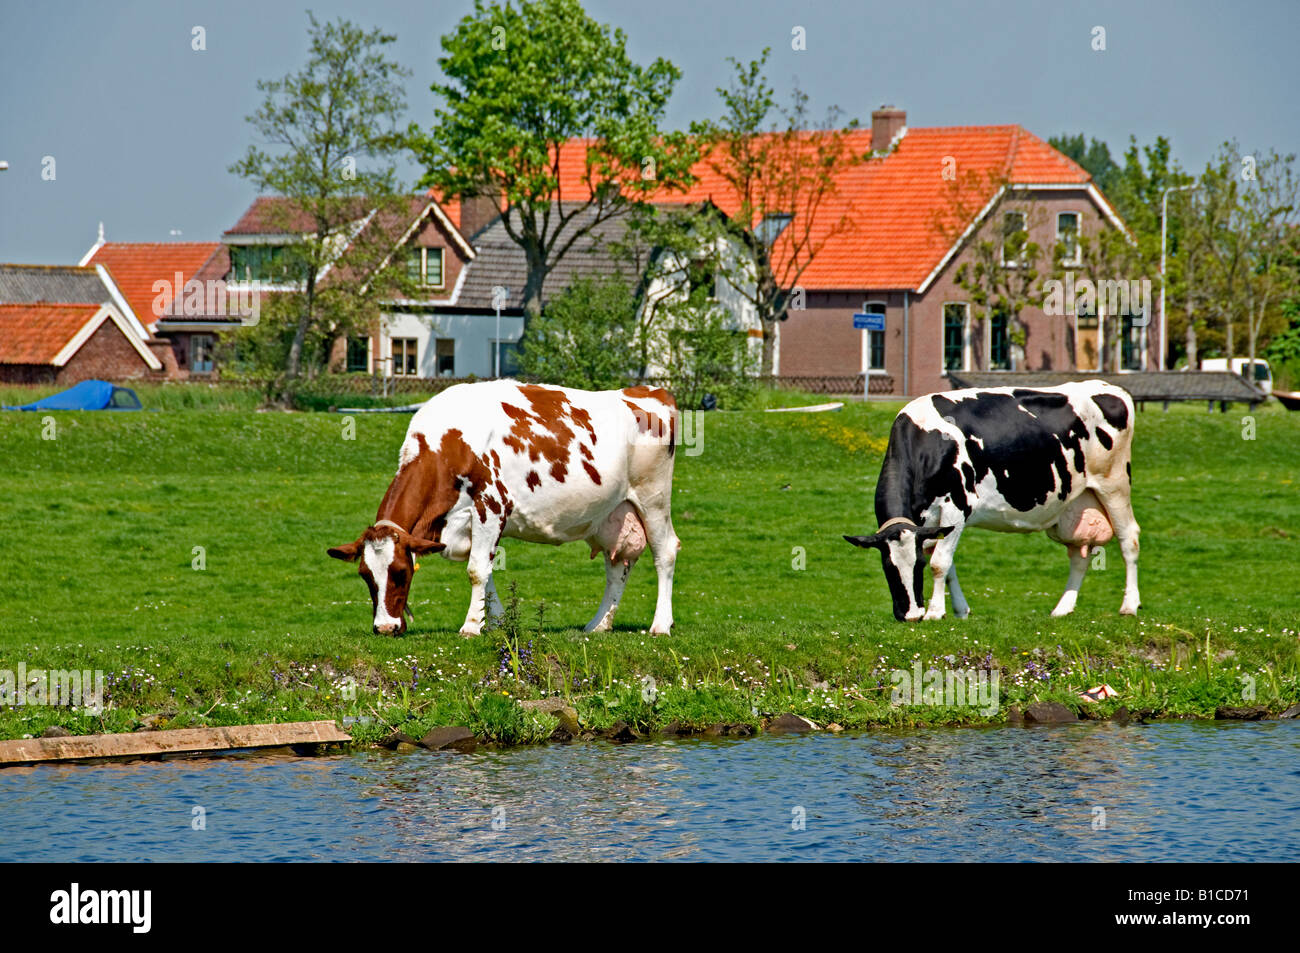 North South Holland Cow Netherlands dutch Stock Photo